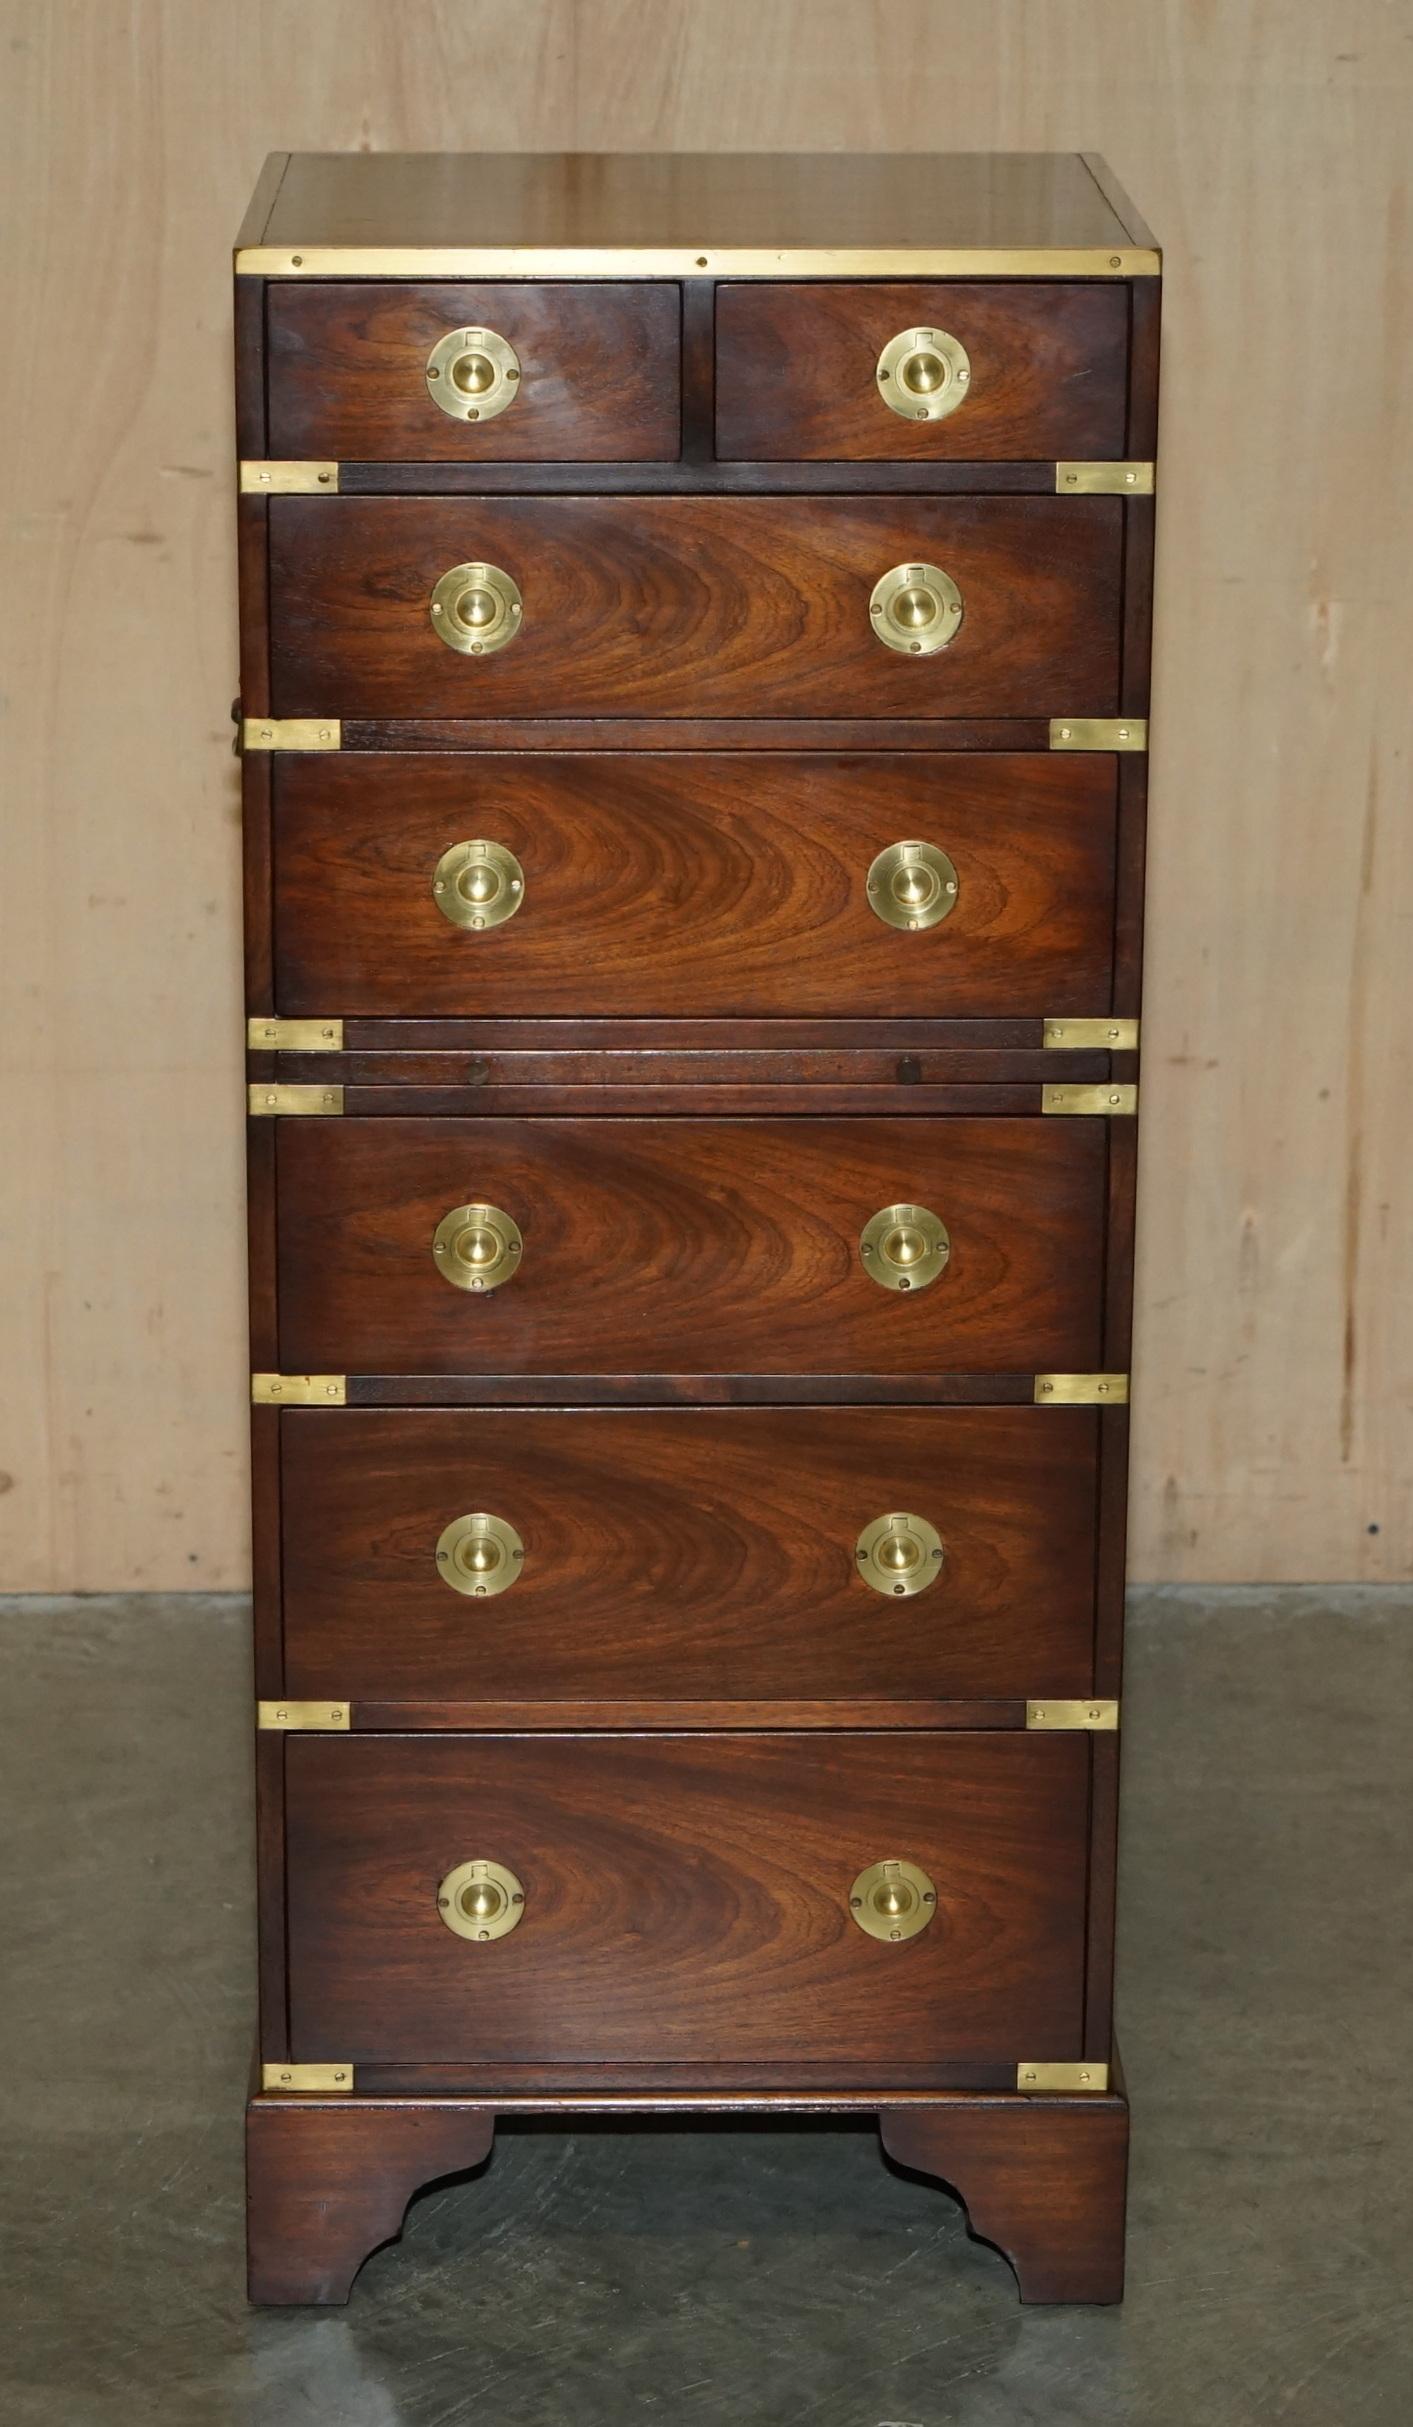 Hand-Crafted RARE VINTAGE MiLITARY CAMPAIGN TALLBOY CHEST OF DRAWERS GREEN LEATHER SLIP TRAY